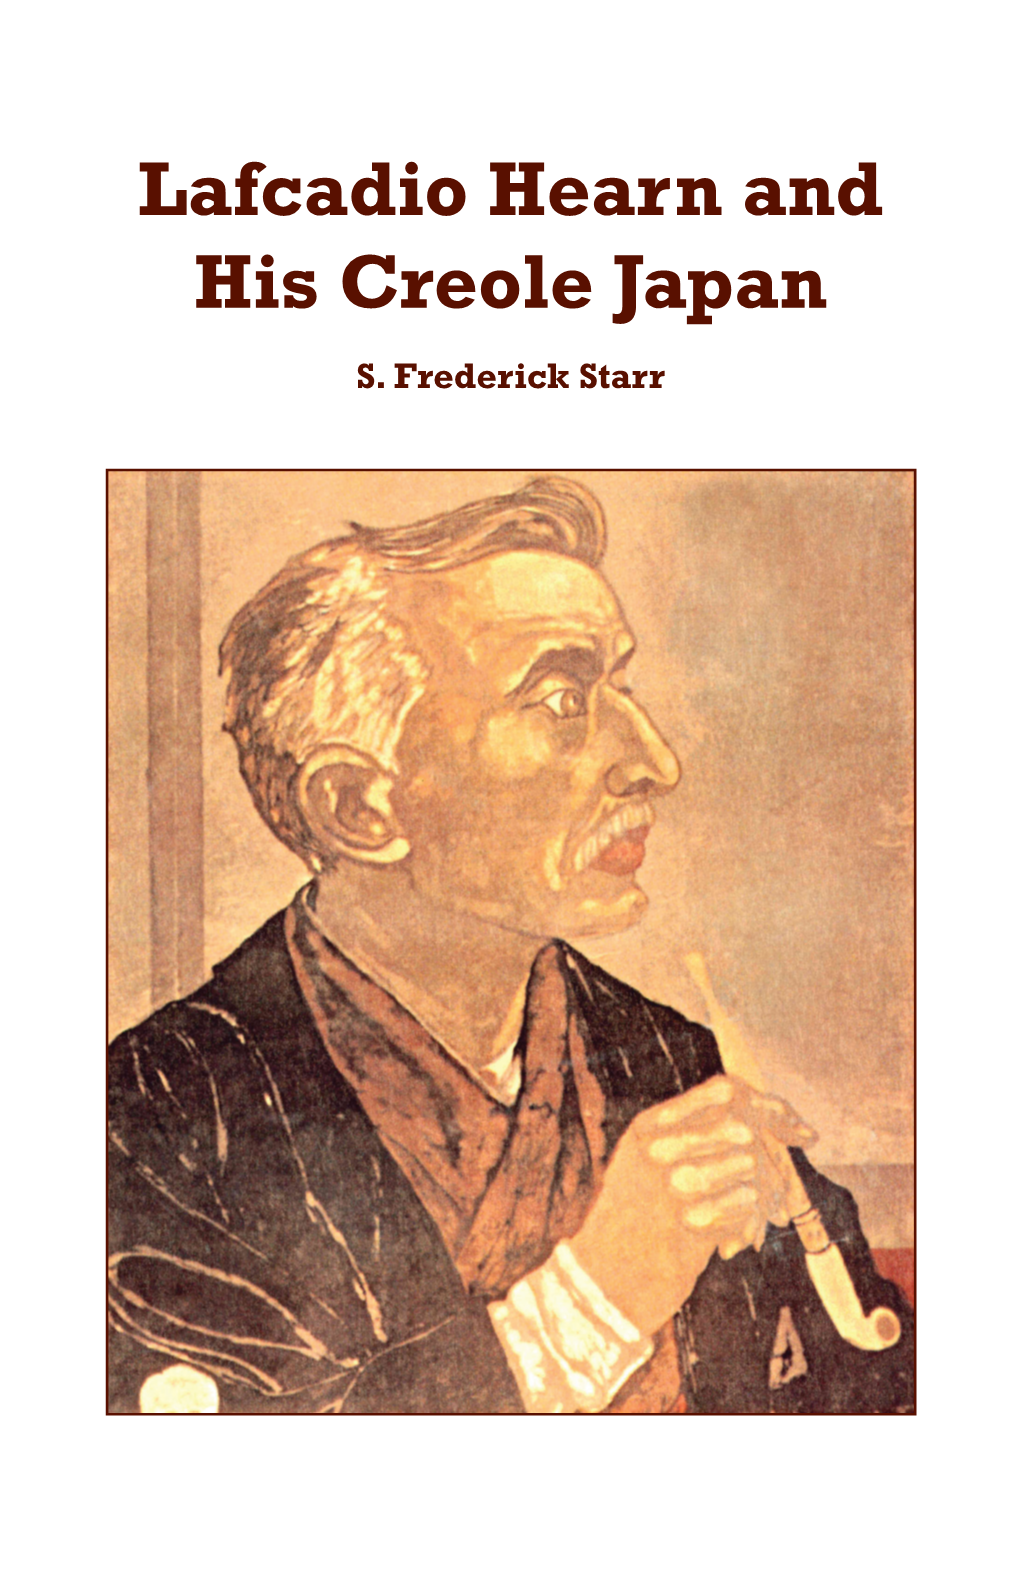 Lafcadio Hearn and His Creole Japan by S. Frederick Starr